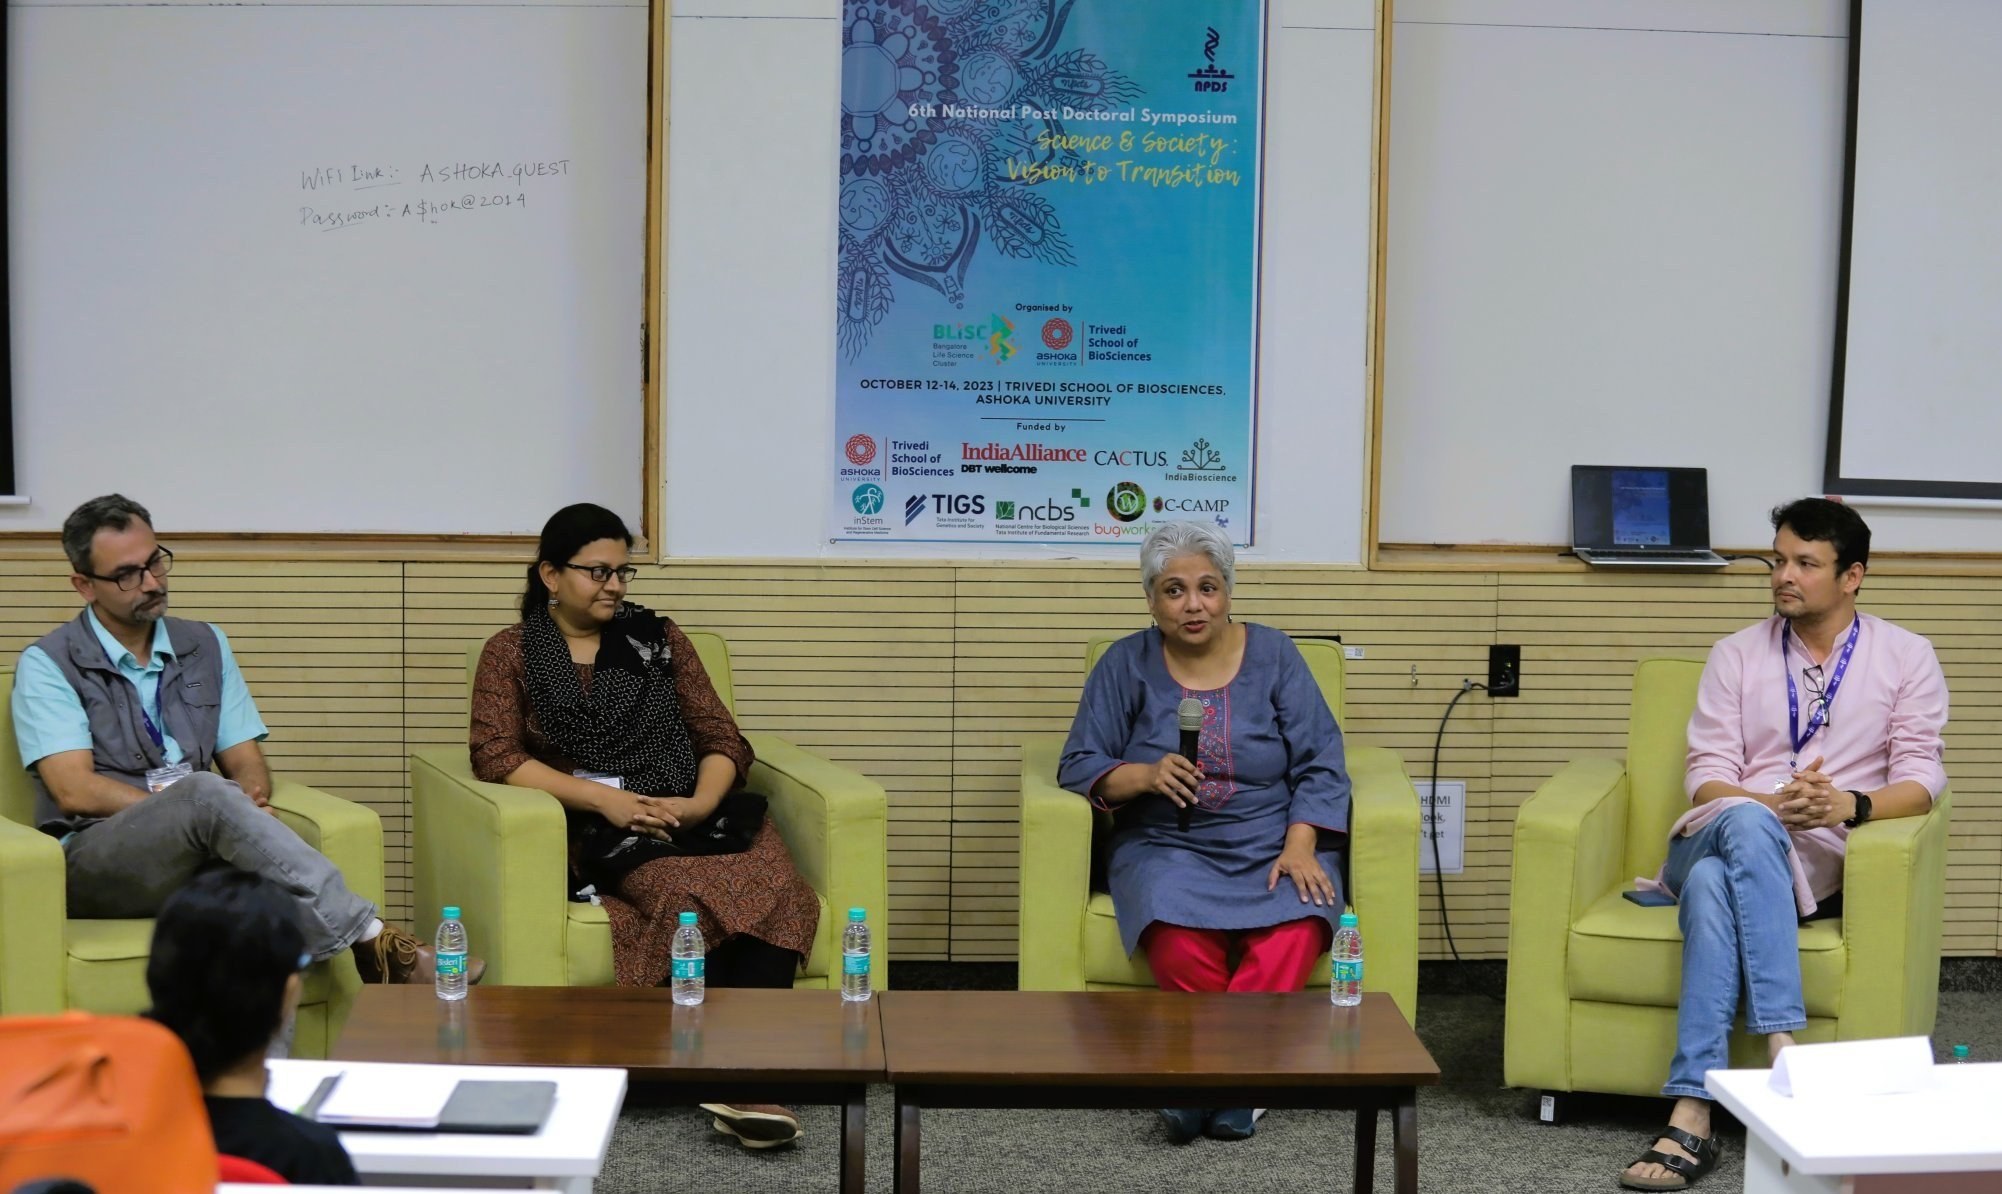 Panel discussion on the practical aspects of starting a lab (L to R: Dhananjay Chaturvedi, Mridula Nambiar, Shubha Tole, Imroze Khan). Picture Credits: Gaurav Kumar.